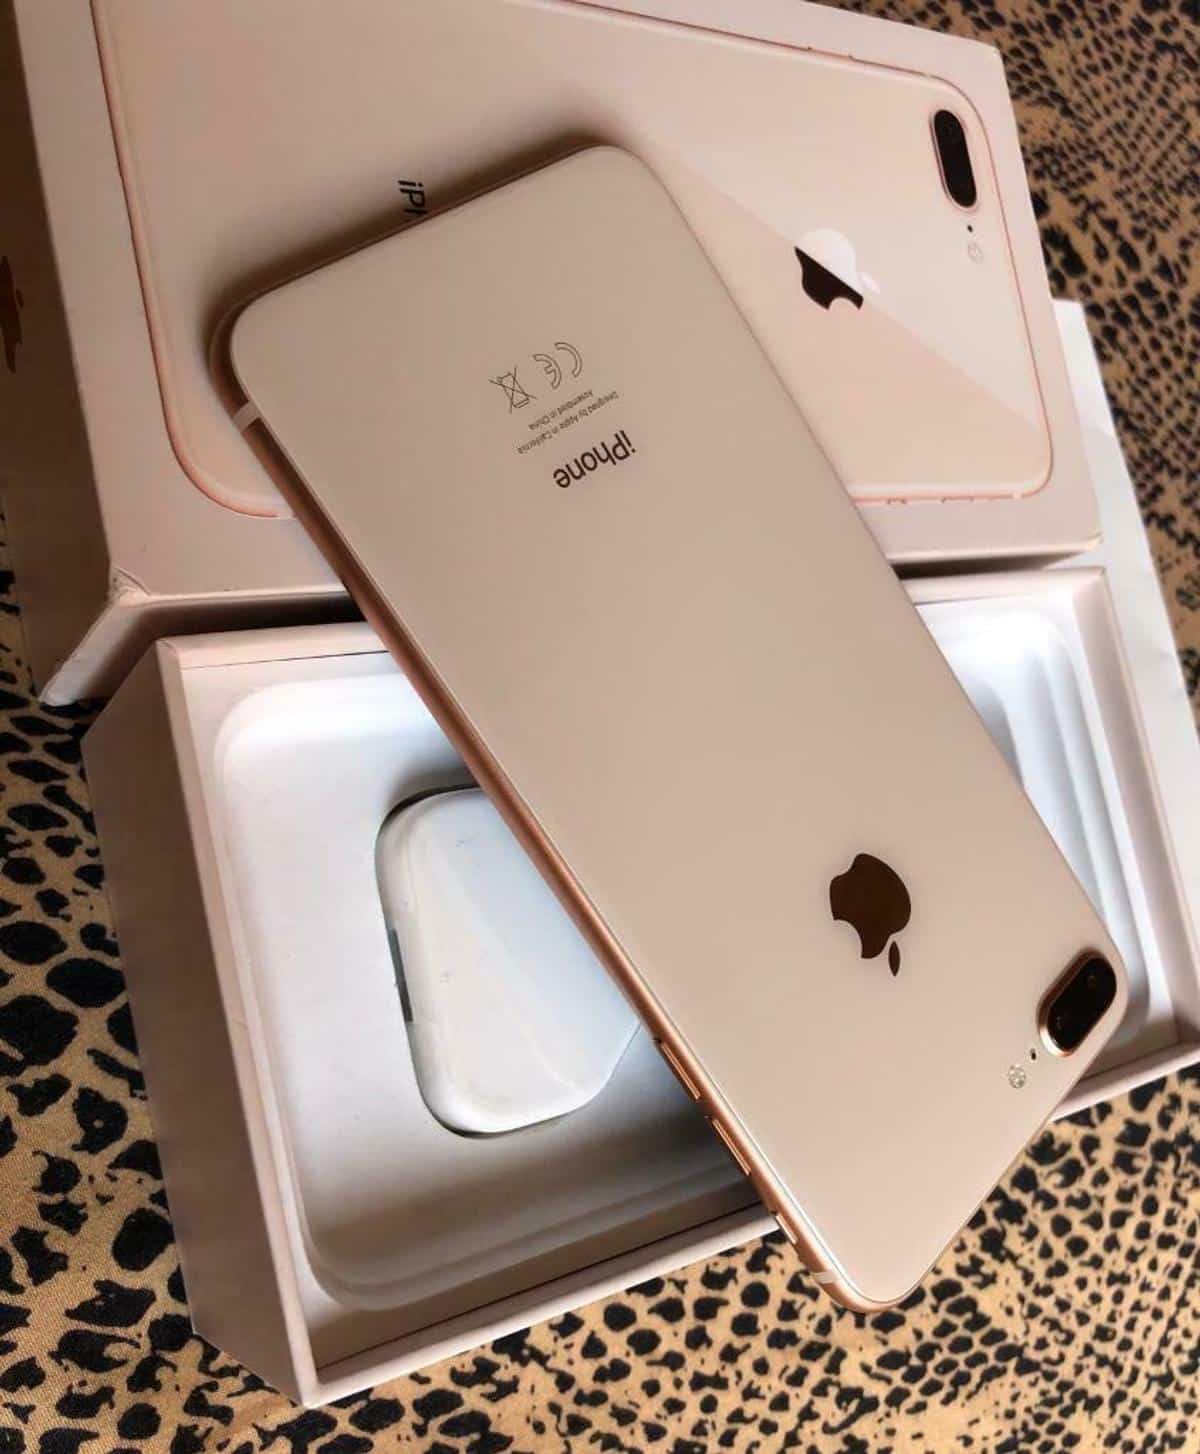 iPhone 8 Plus Gold 128GB Unlocked in E15 London for £275.00 for sale ...